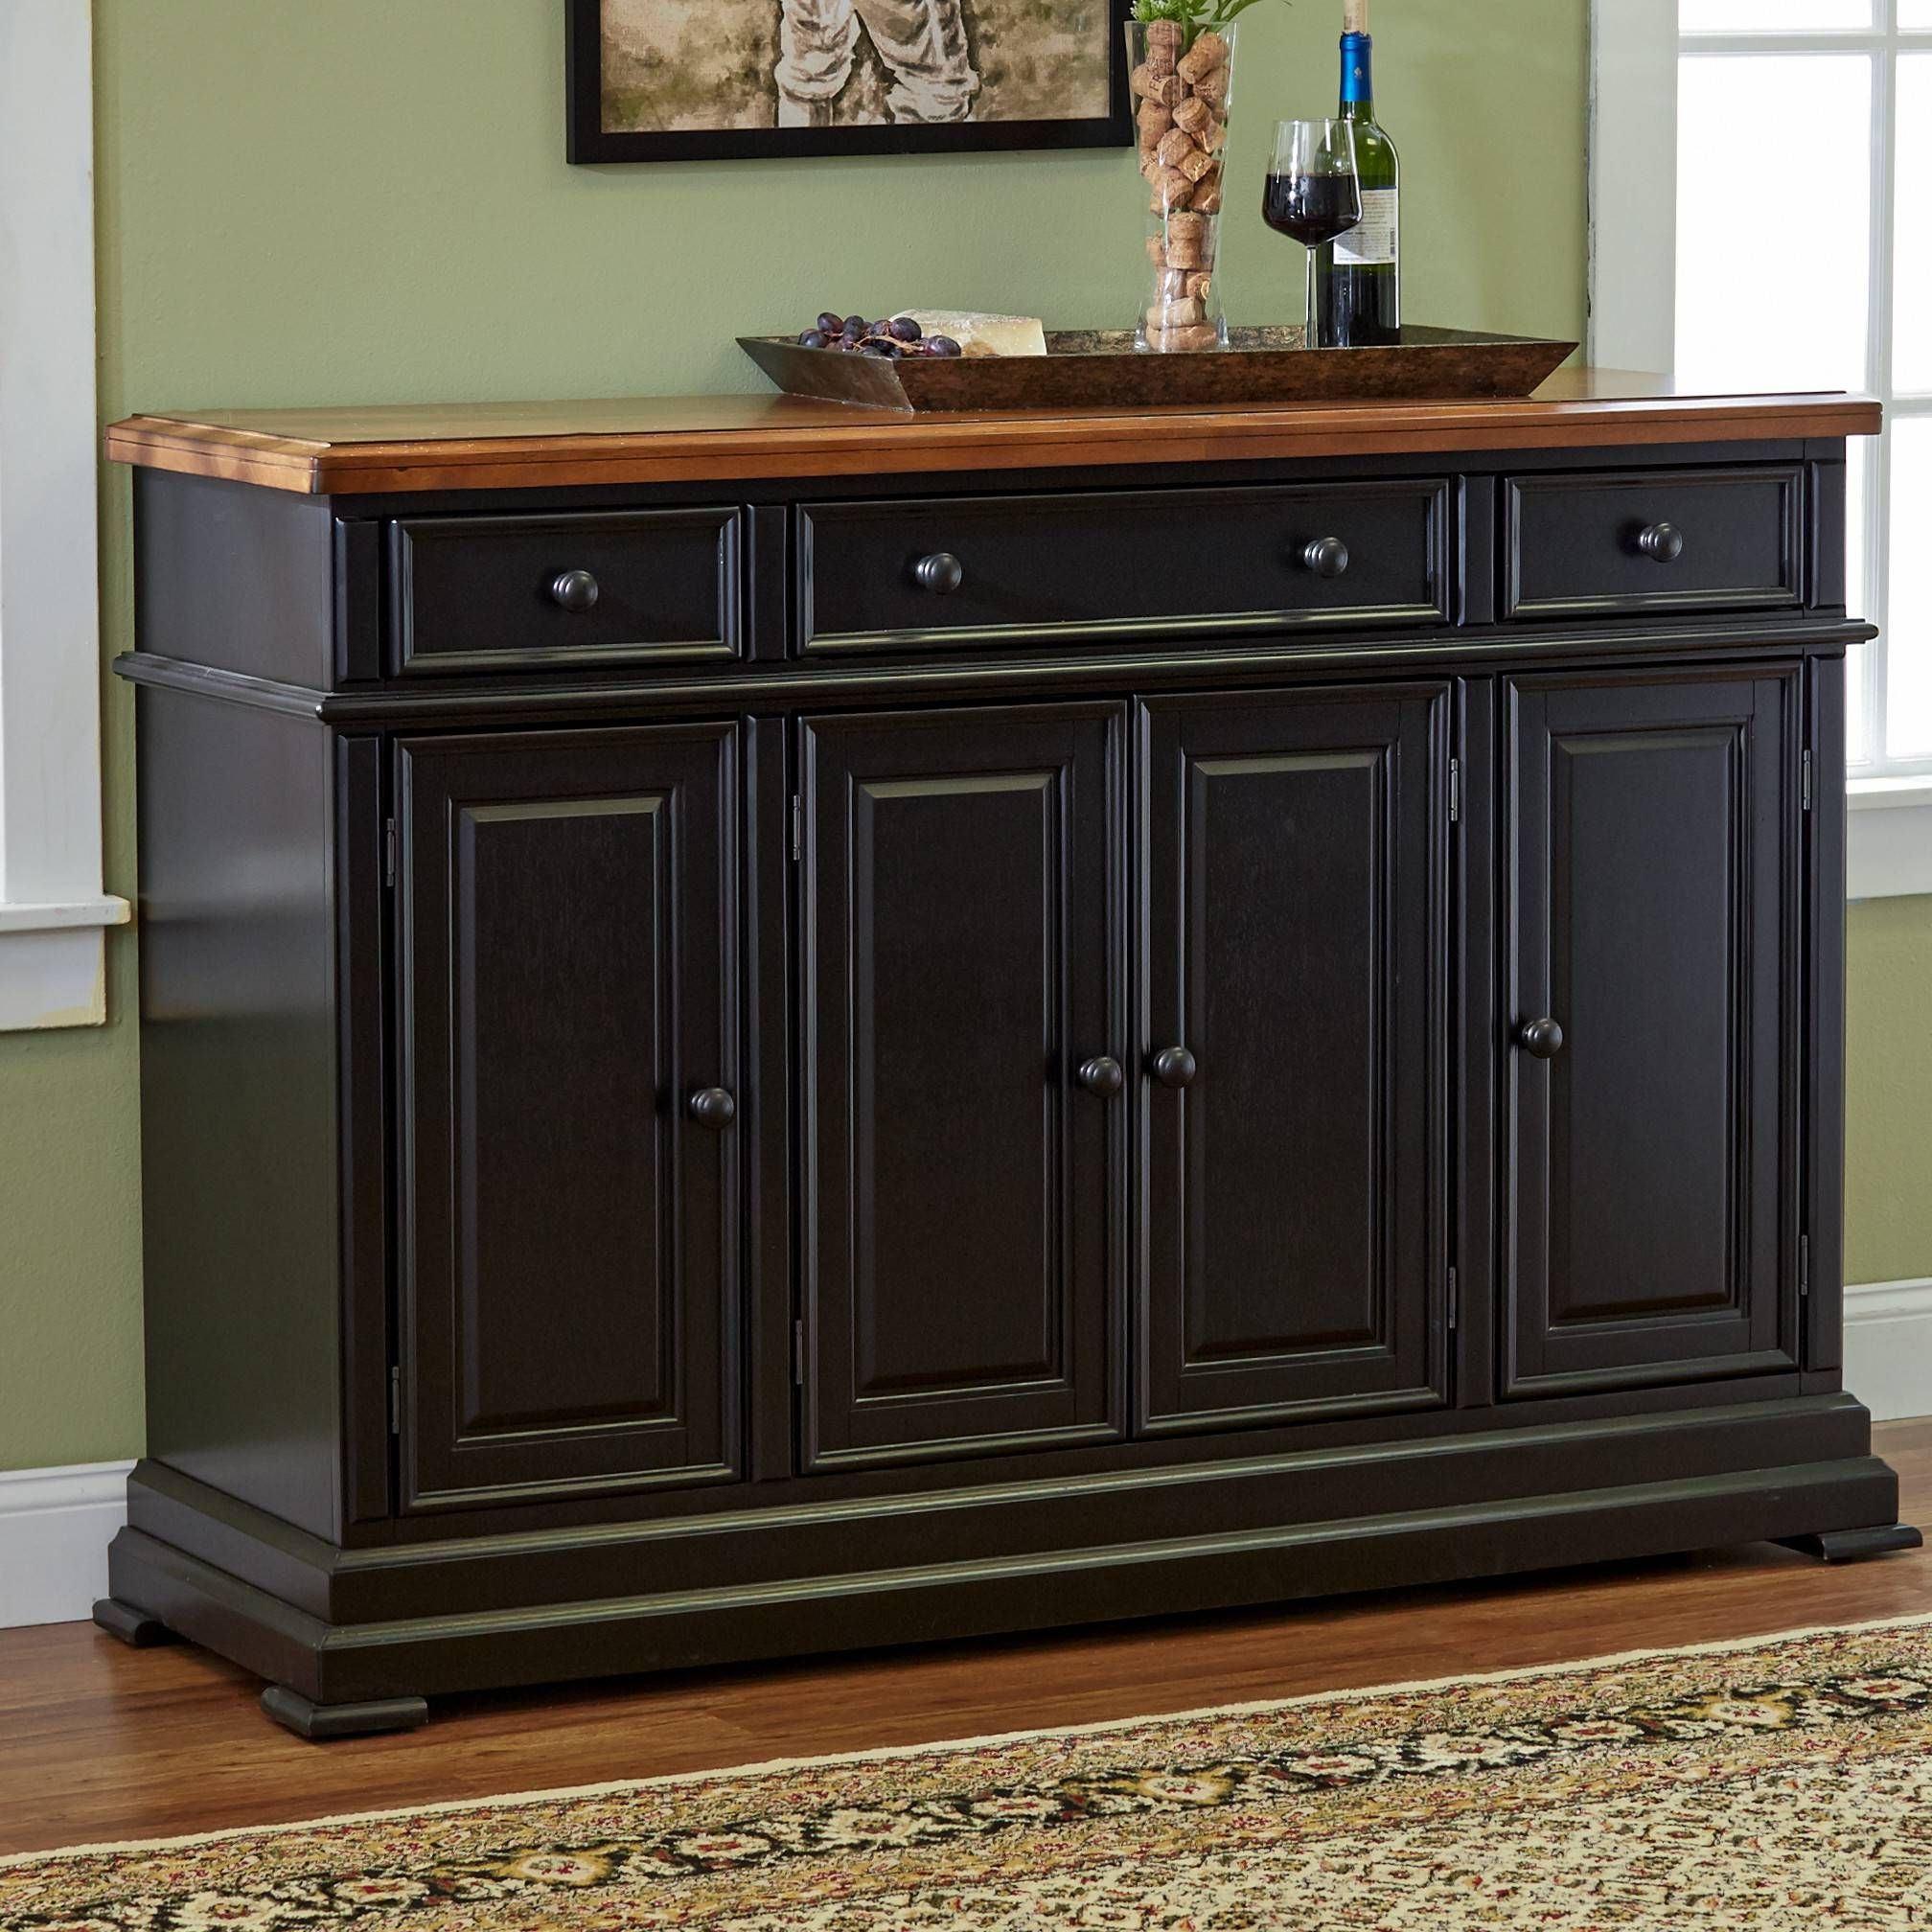 Beautiful Sideboards And Servers – Bjdgjy Pertaining To Dining Room Servers And Sideboards (View 5 of 15)